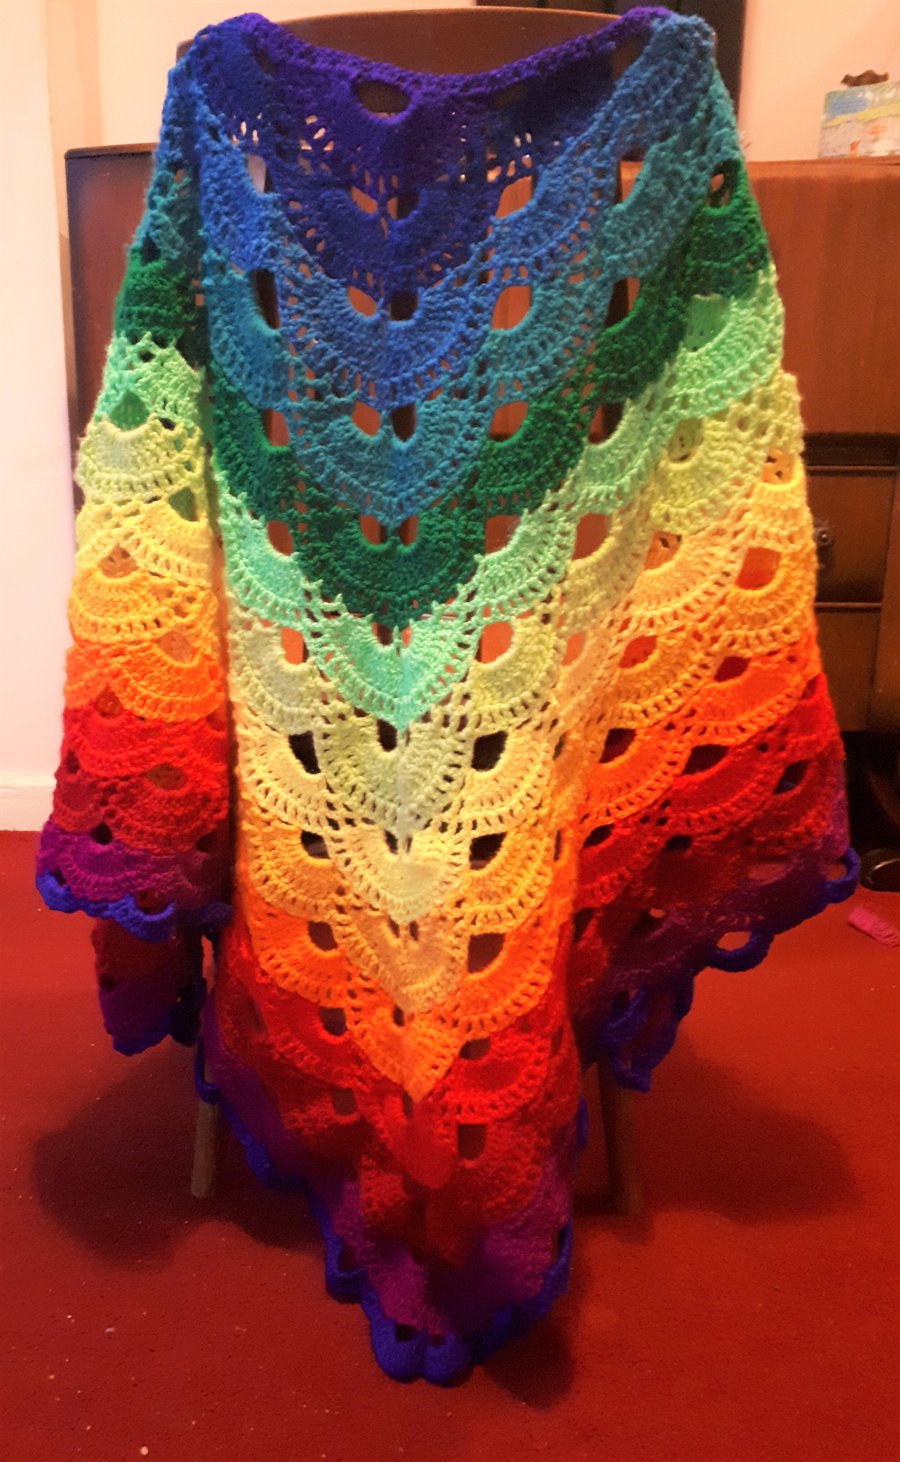 HAND CROCHETED RAINBOW STRIPED LACEY VIRUS PATTERN TRIANGLE SHAWL SCARF WRAP